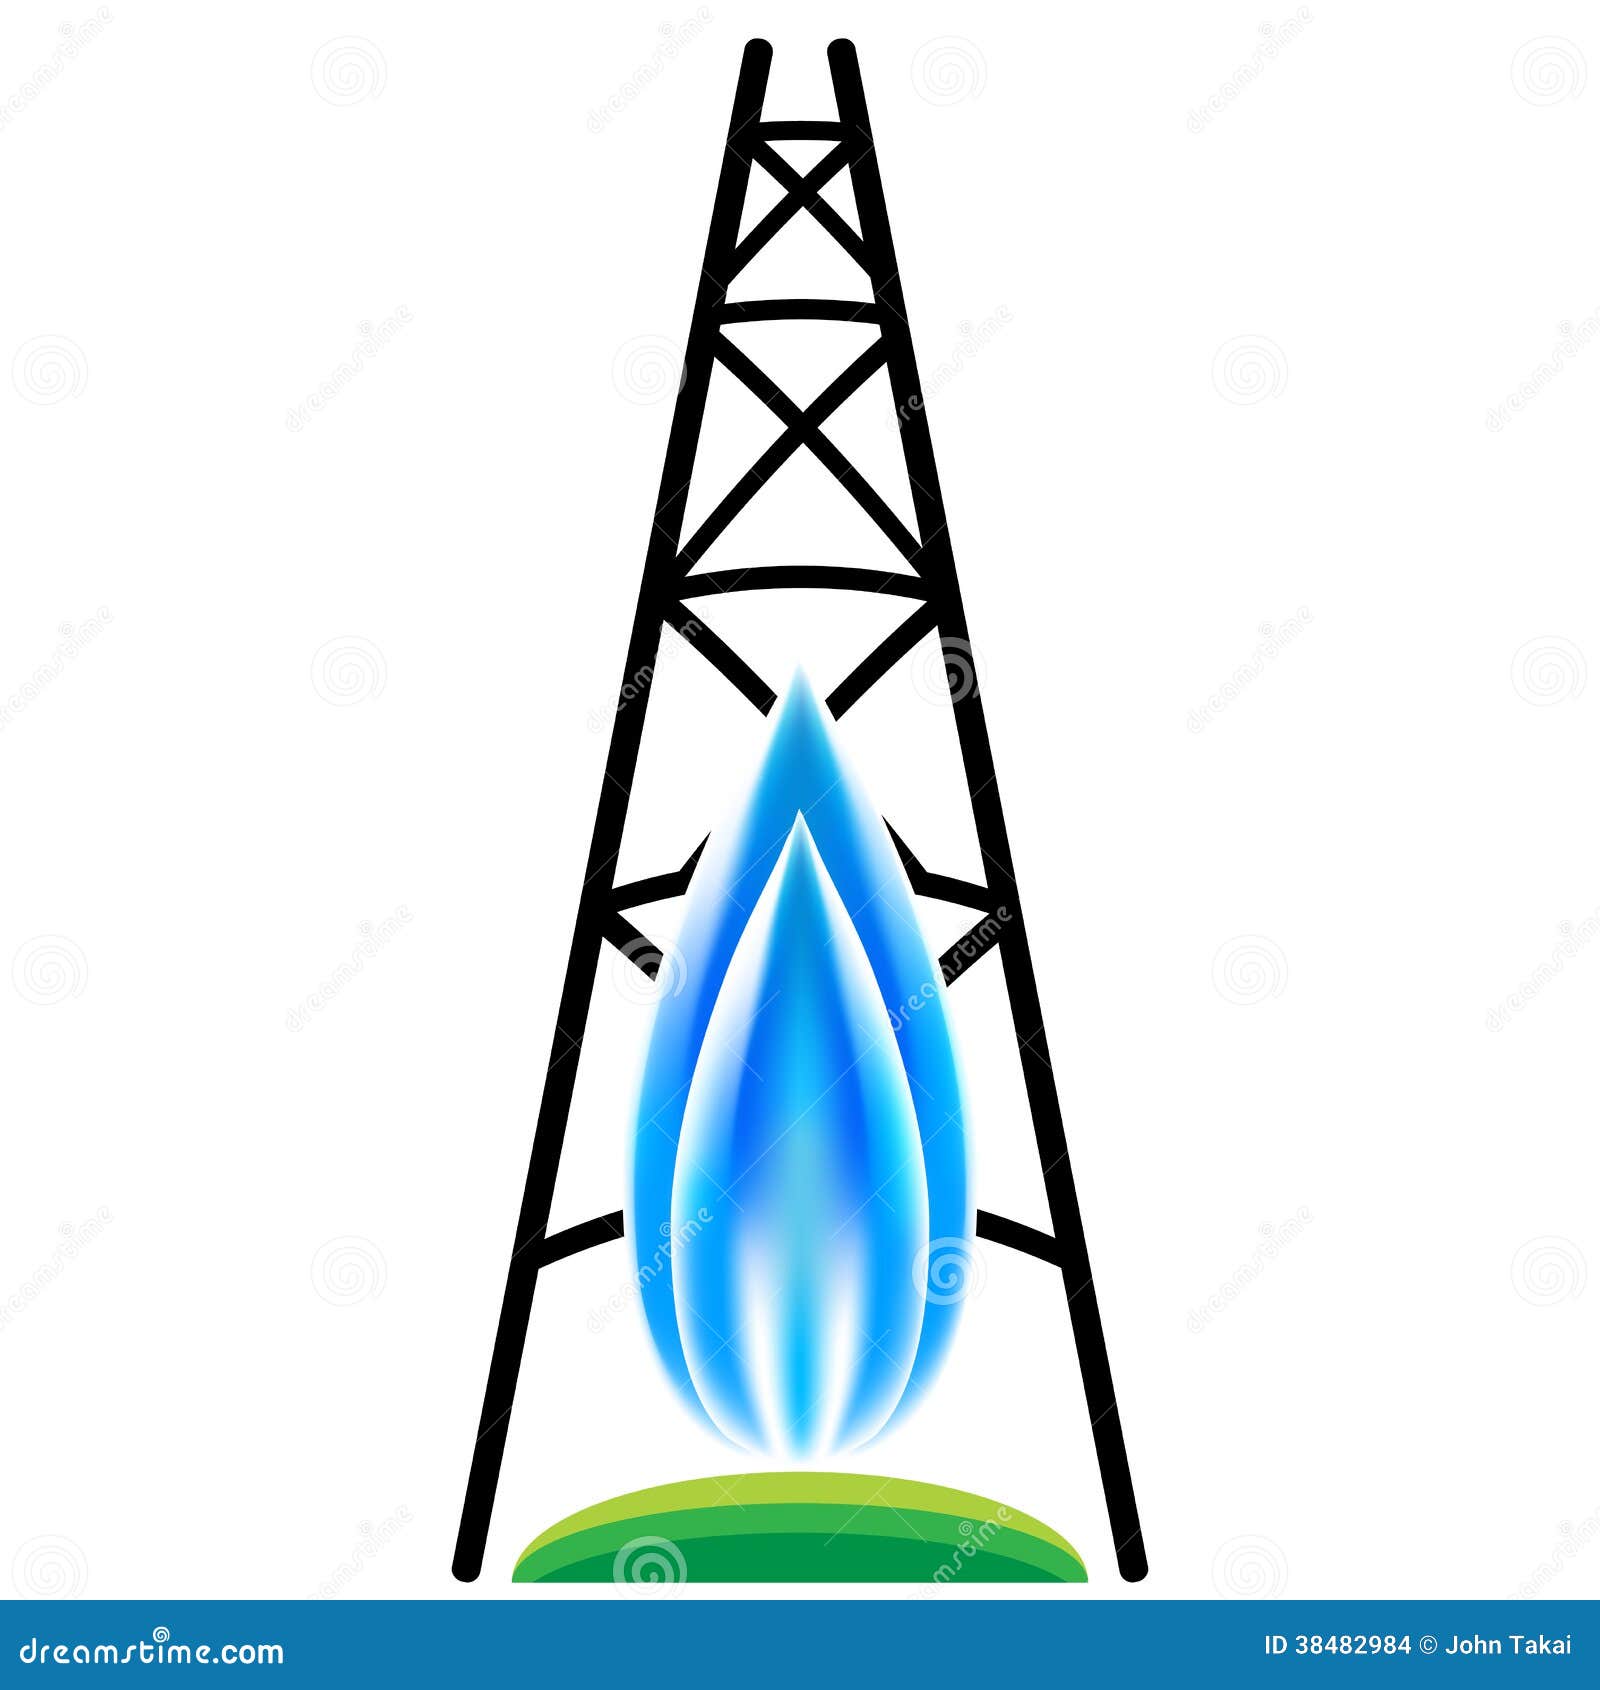 clipart oil well - photo #35